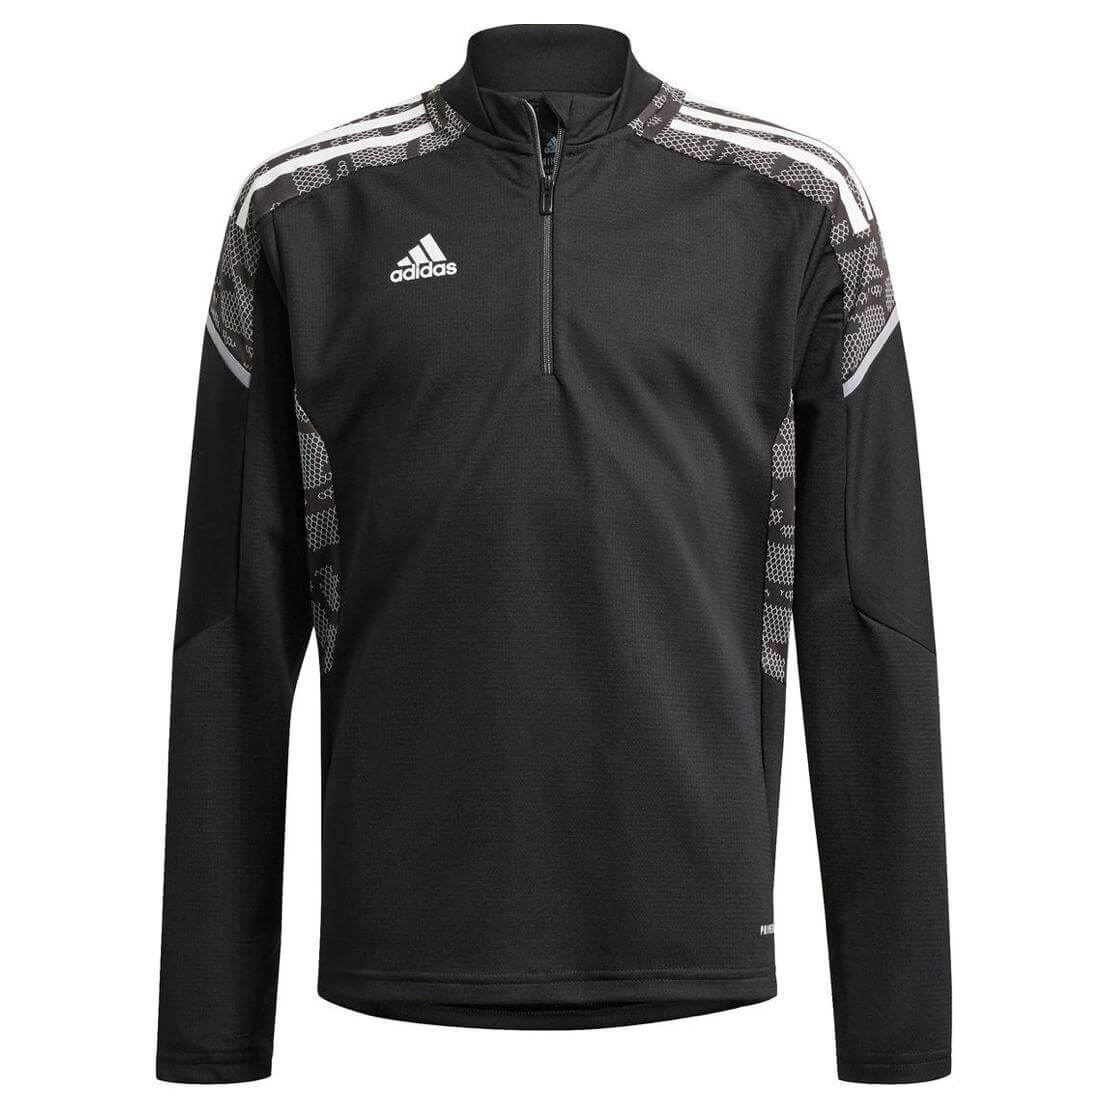 Adidas Condivo 21 Youth Training Top Black (Front)